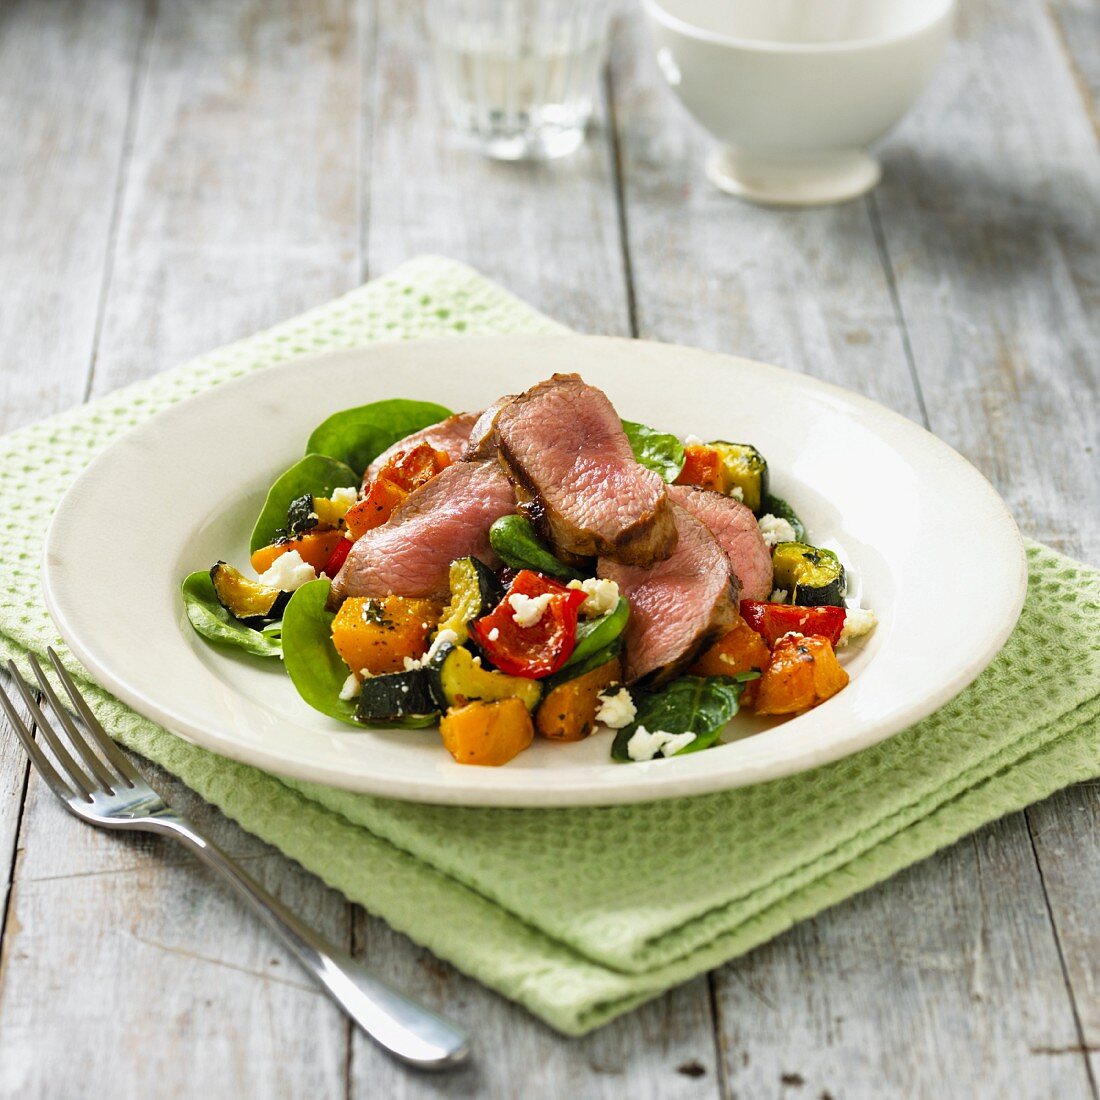 Roasted vegetable salad with lamb and feta cheese